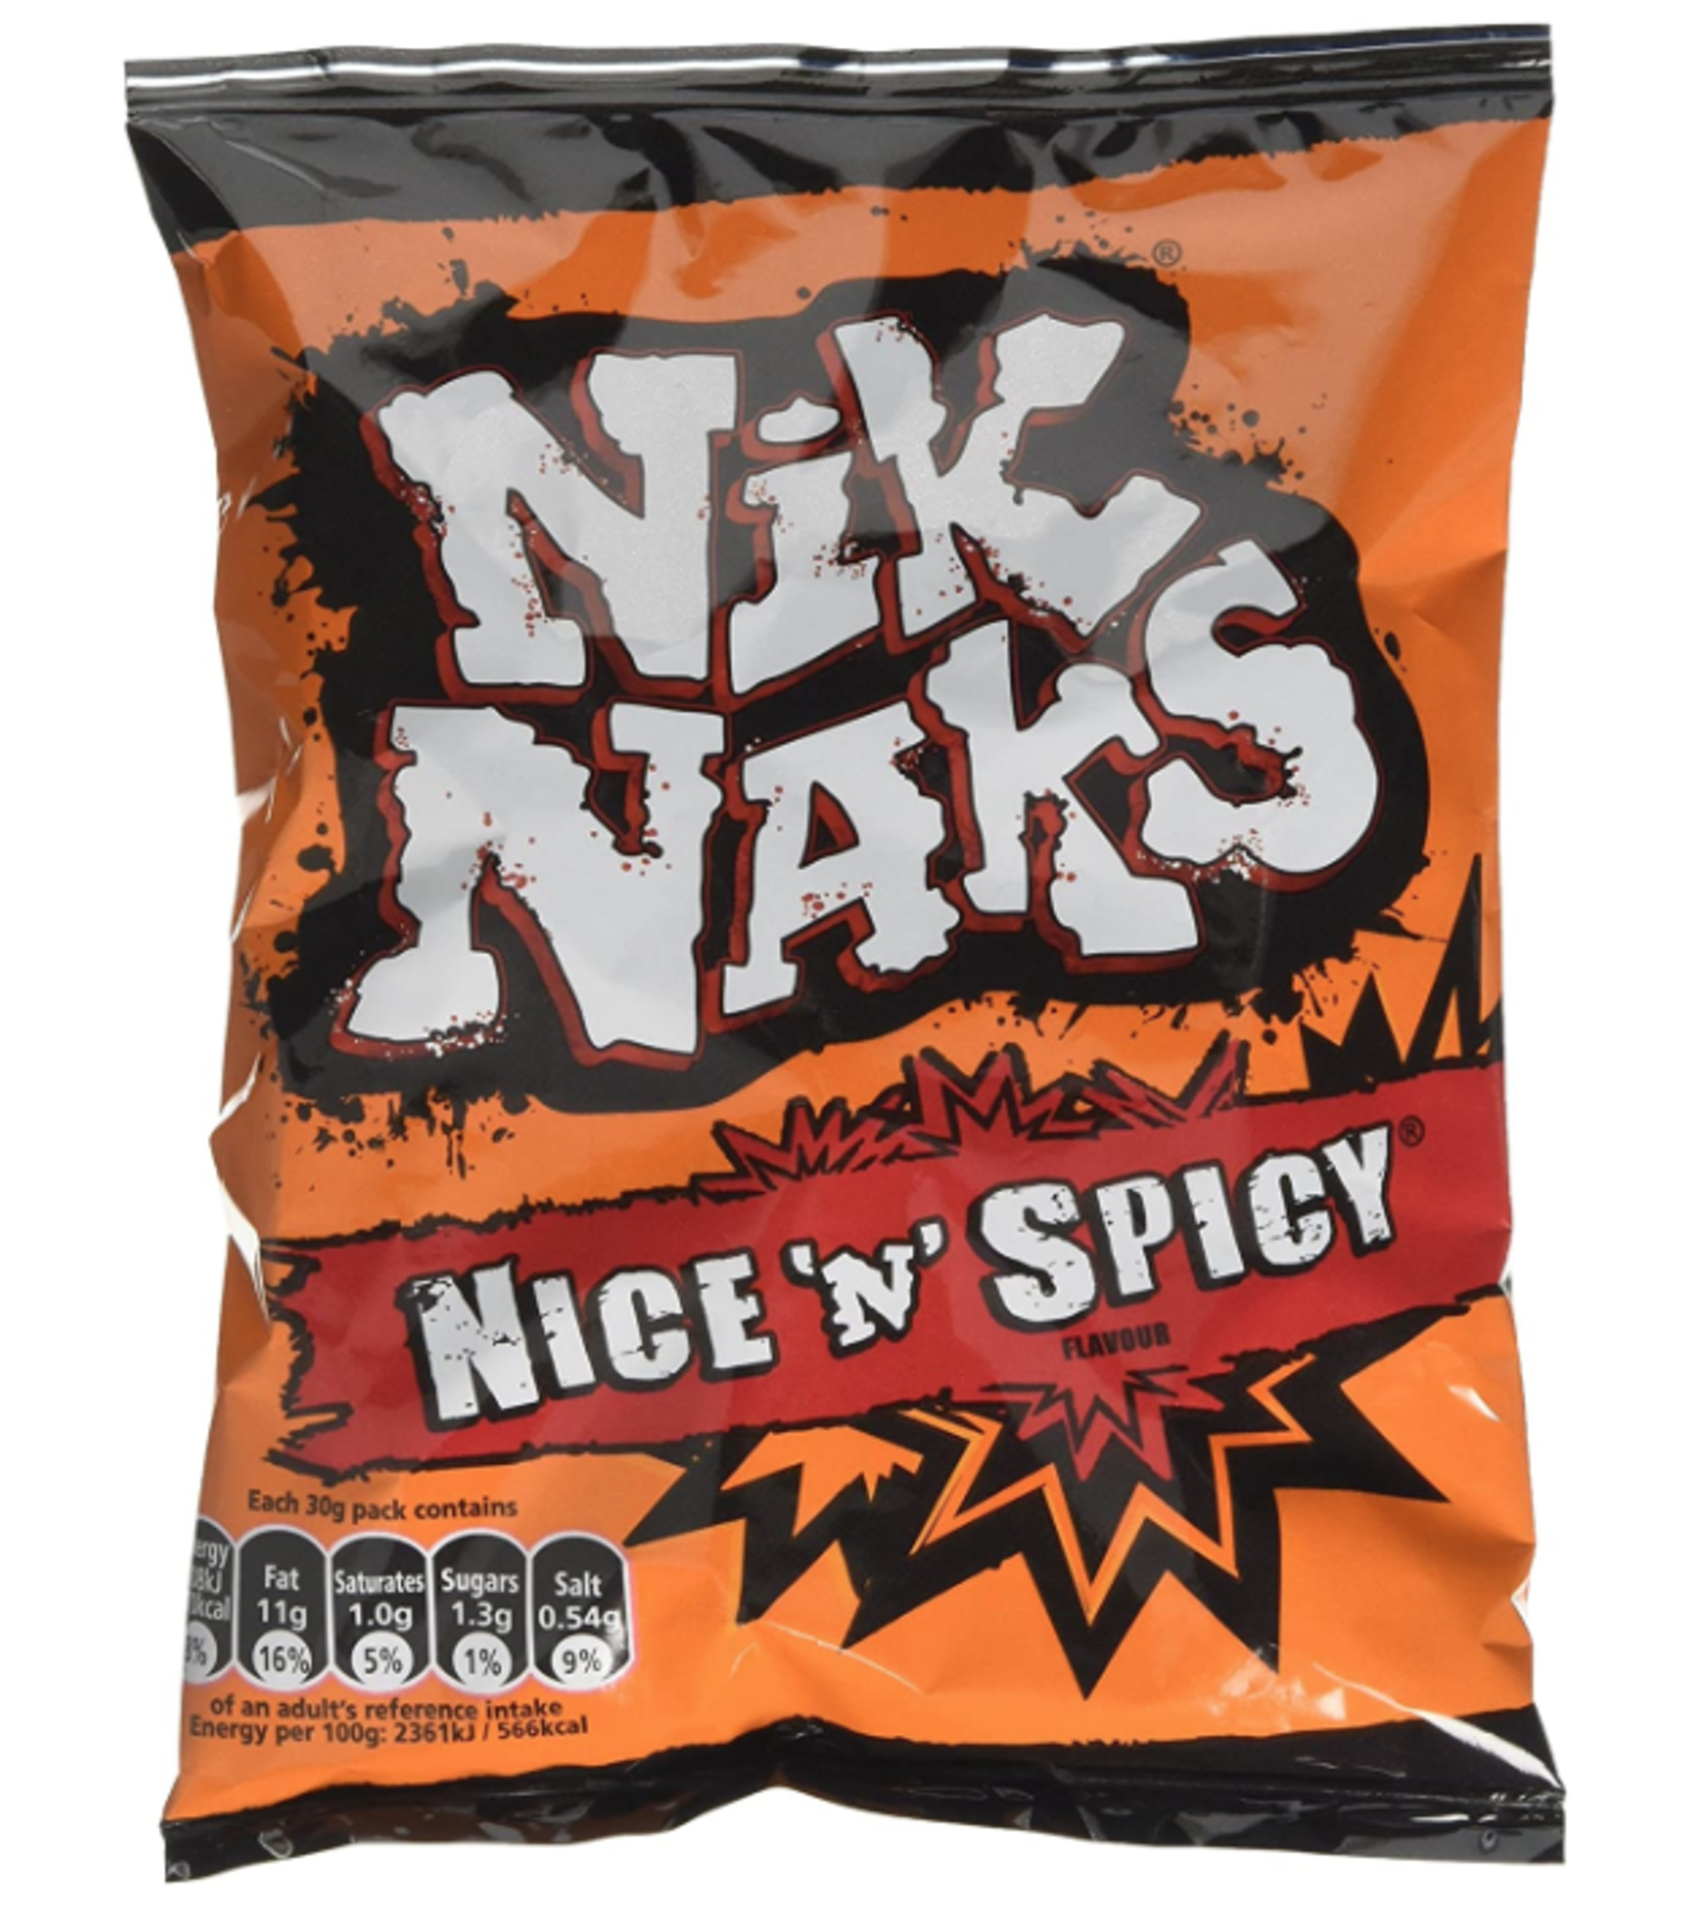 RRP £1289 (Approx. Count 95) spW58f7524q 33 x Nik Naks Nice 'N' Spicy Crisps 30g, Case of 28 -